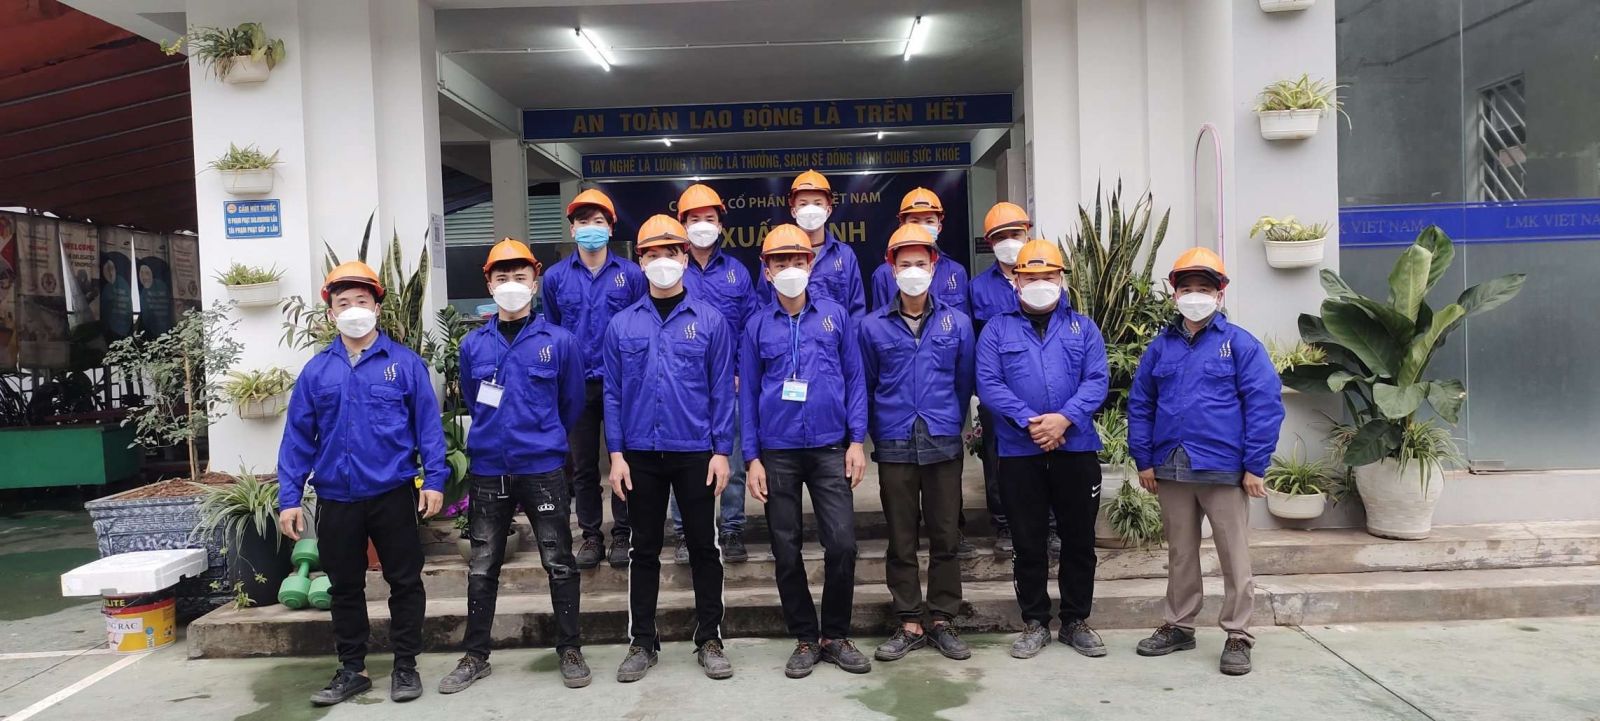 Vietnam Manpower successed recruit workers for Riela Company in Romania